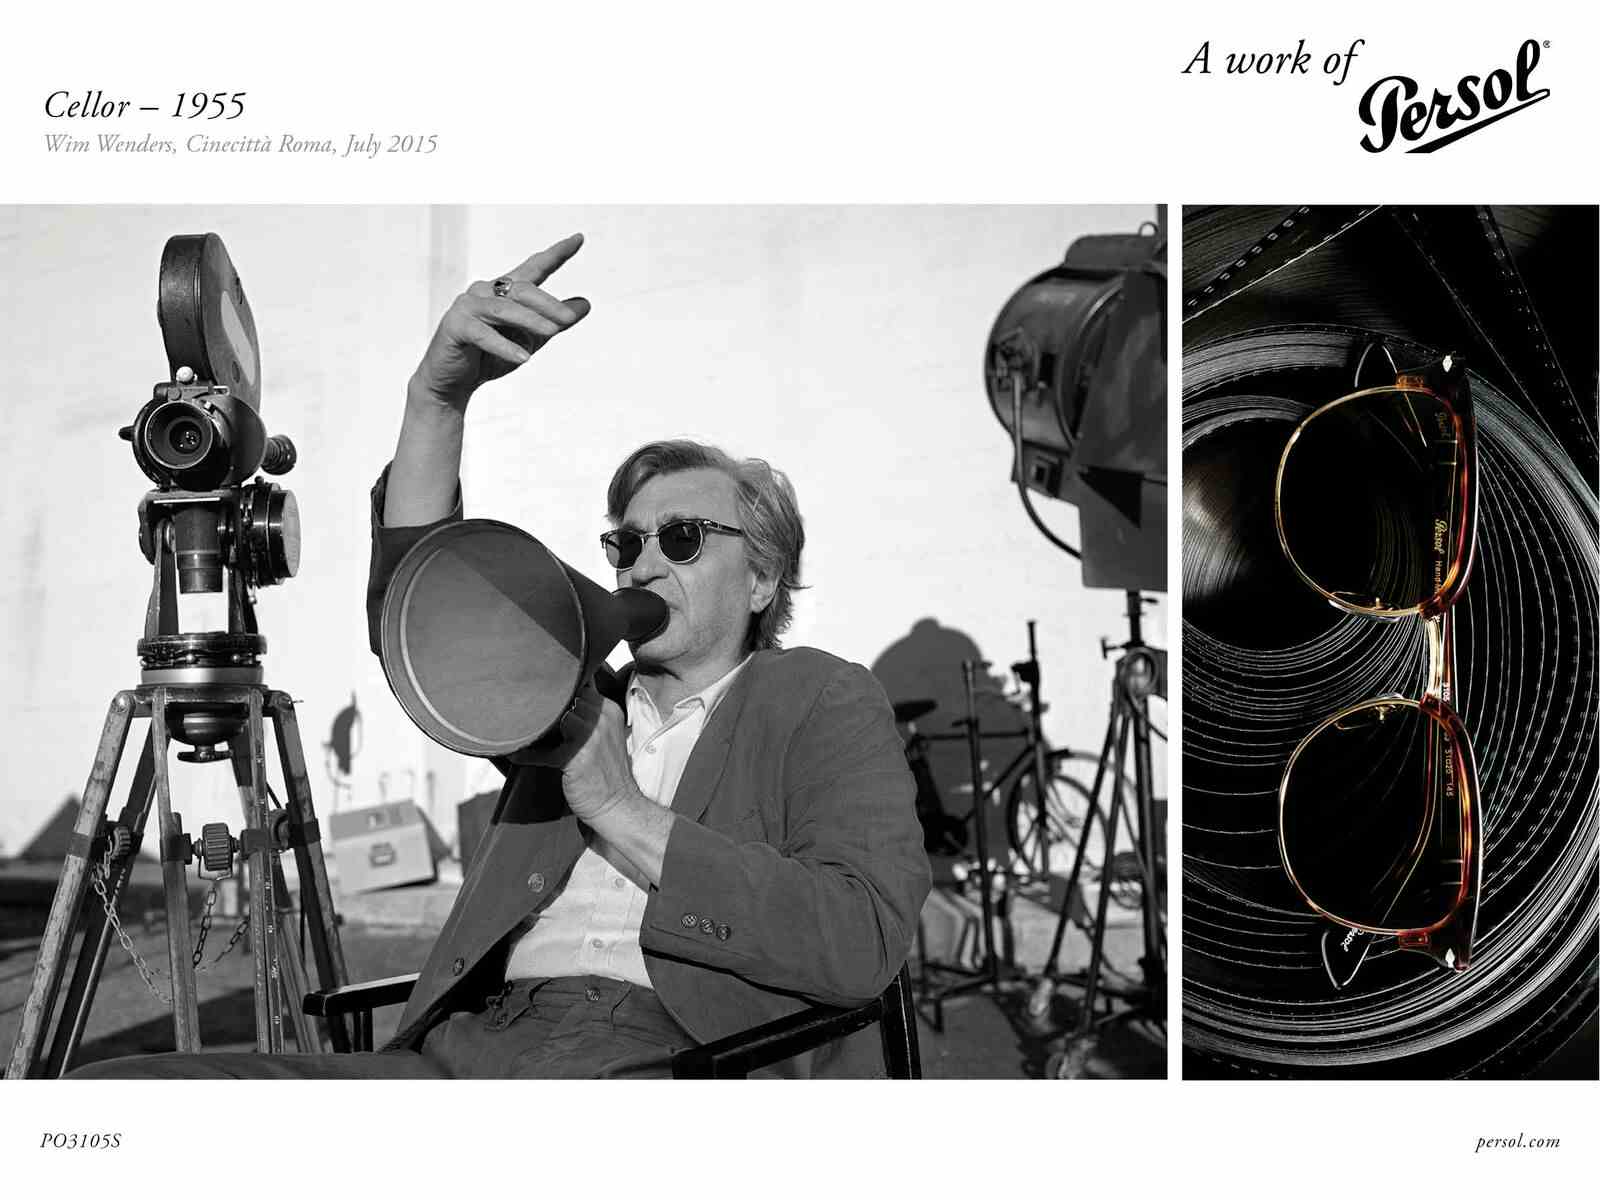 PERSOL - 2015
Photographer: Tom Craig
Model: Wim Wenders
Location: Rome - Italy